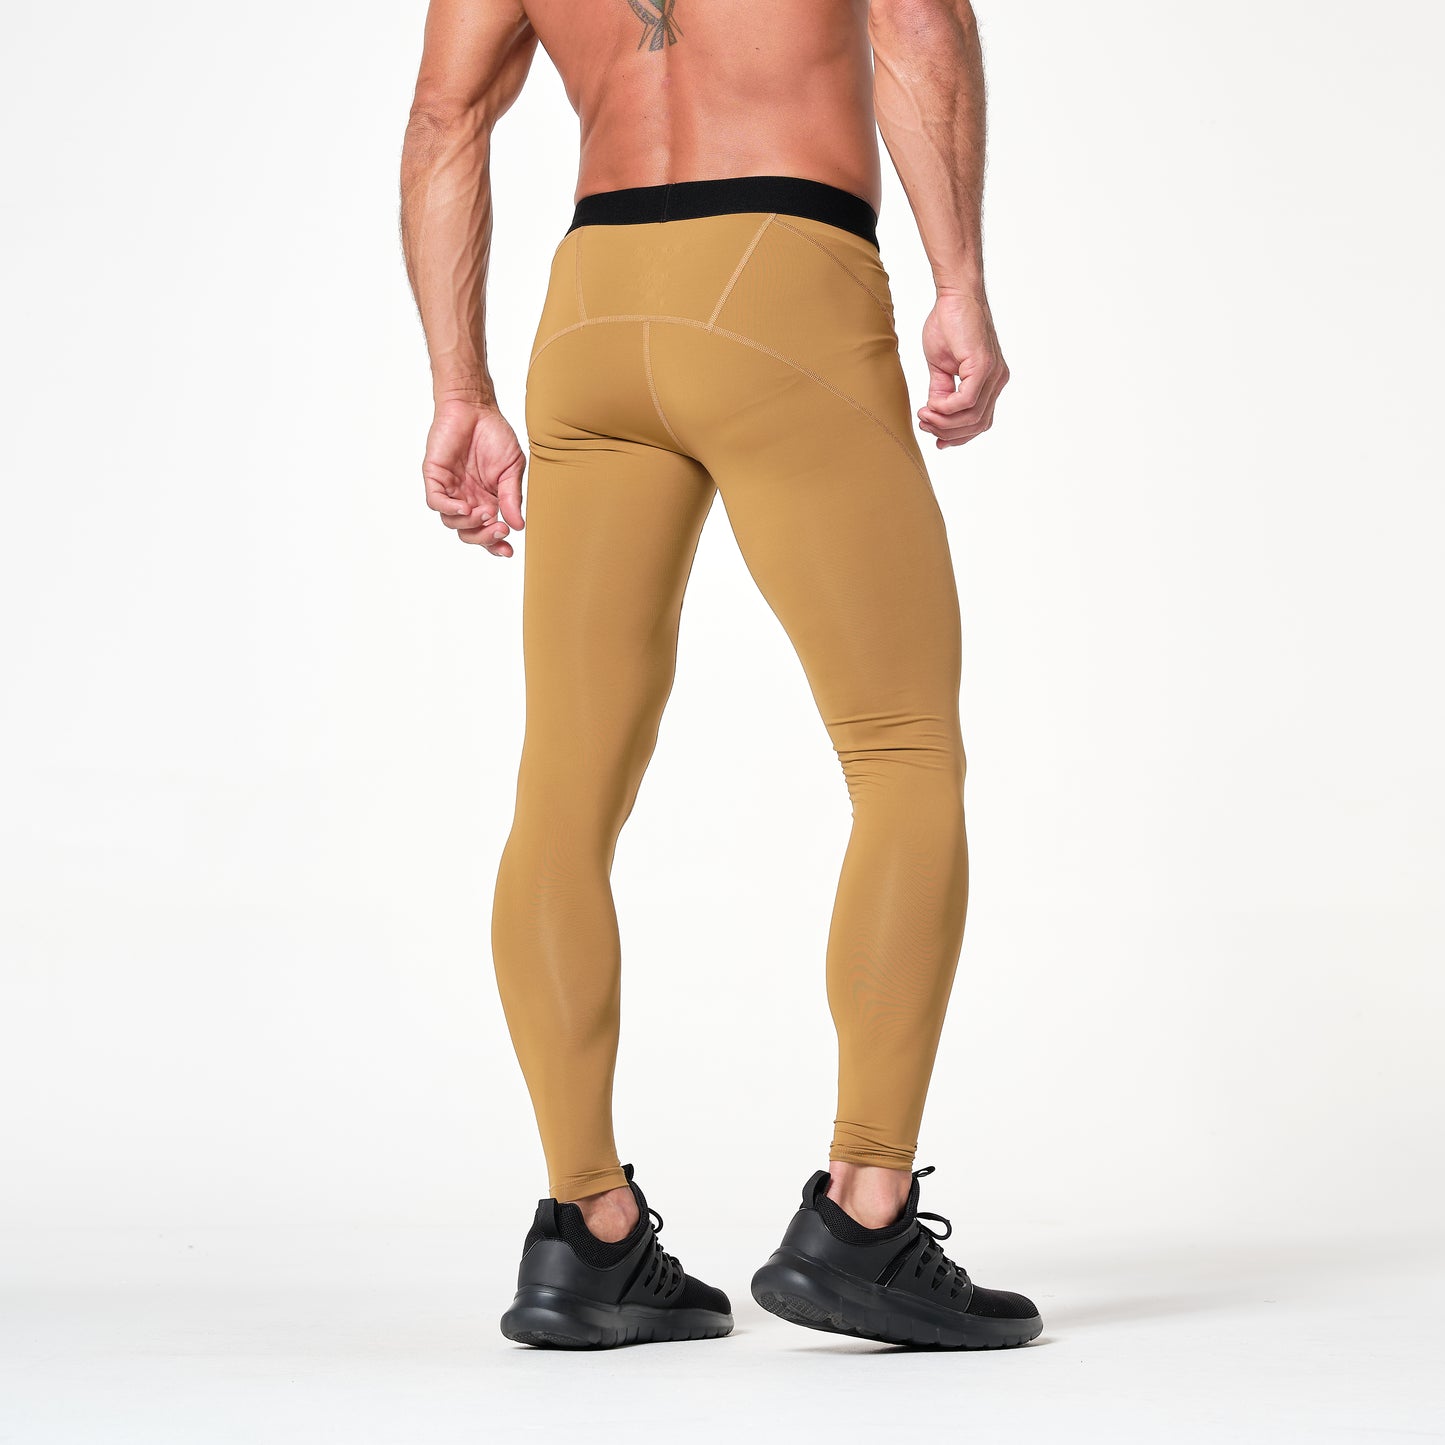 Men's New Breathable Stretchy Pro Compression Pants Running Tights